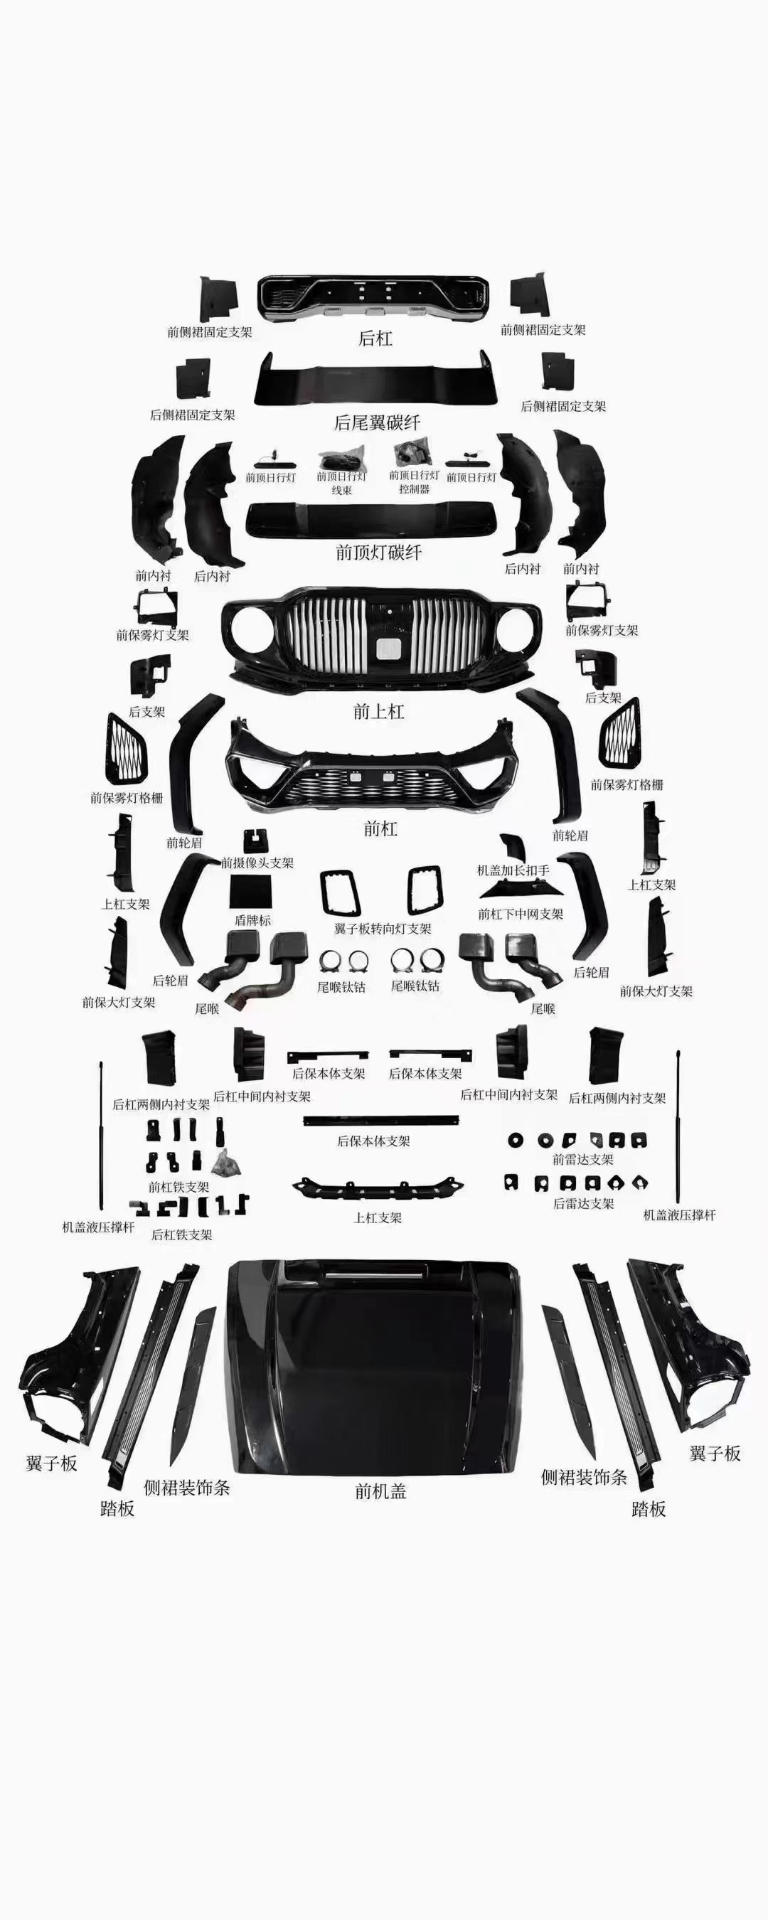 Auto Modification Conversion W464 G900 Body kits for Mercedes Benz W463 2002-2018 G upgrade to W464 B900 Rocket May Bach body kits